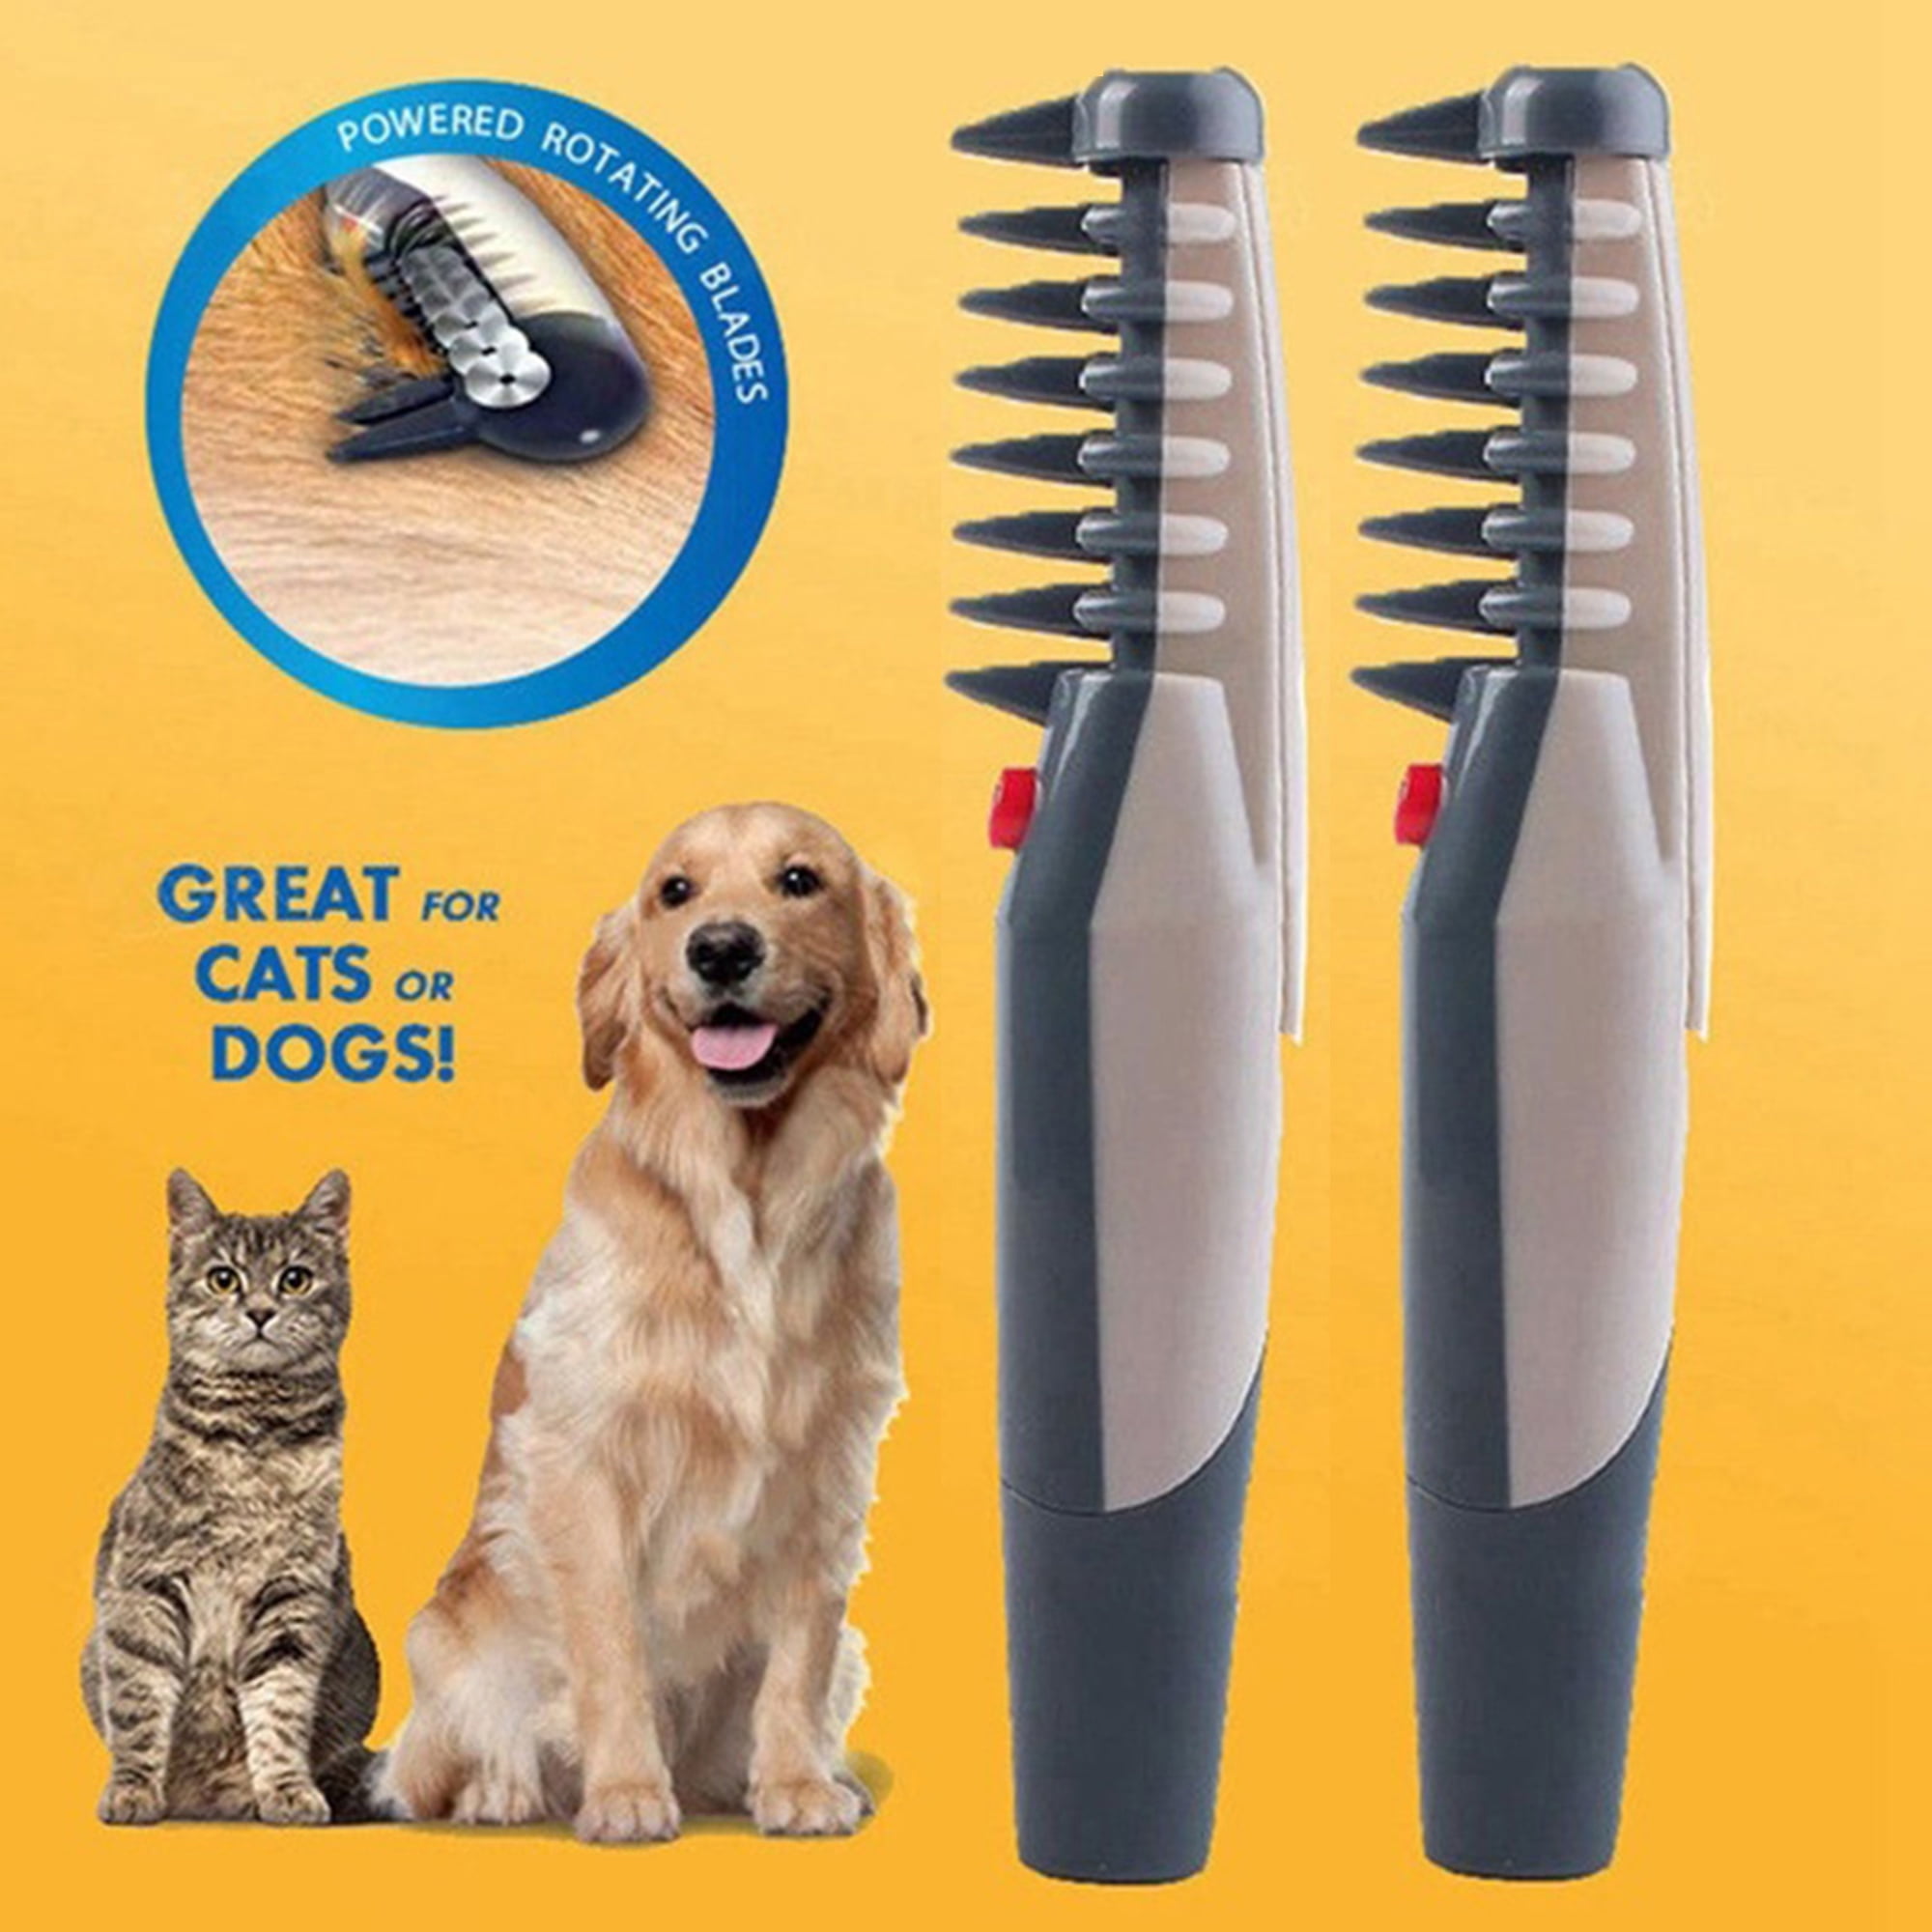 JDBLD Electric Pet Dog Grooming Comb Cat Hair Trimmer Knot Out Remove Mats Tangles Tool Supplies Grooming Cat Brush For Dogs Removes Color : No box, Size : One size